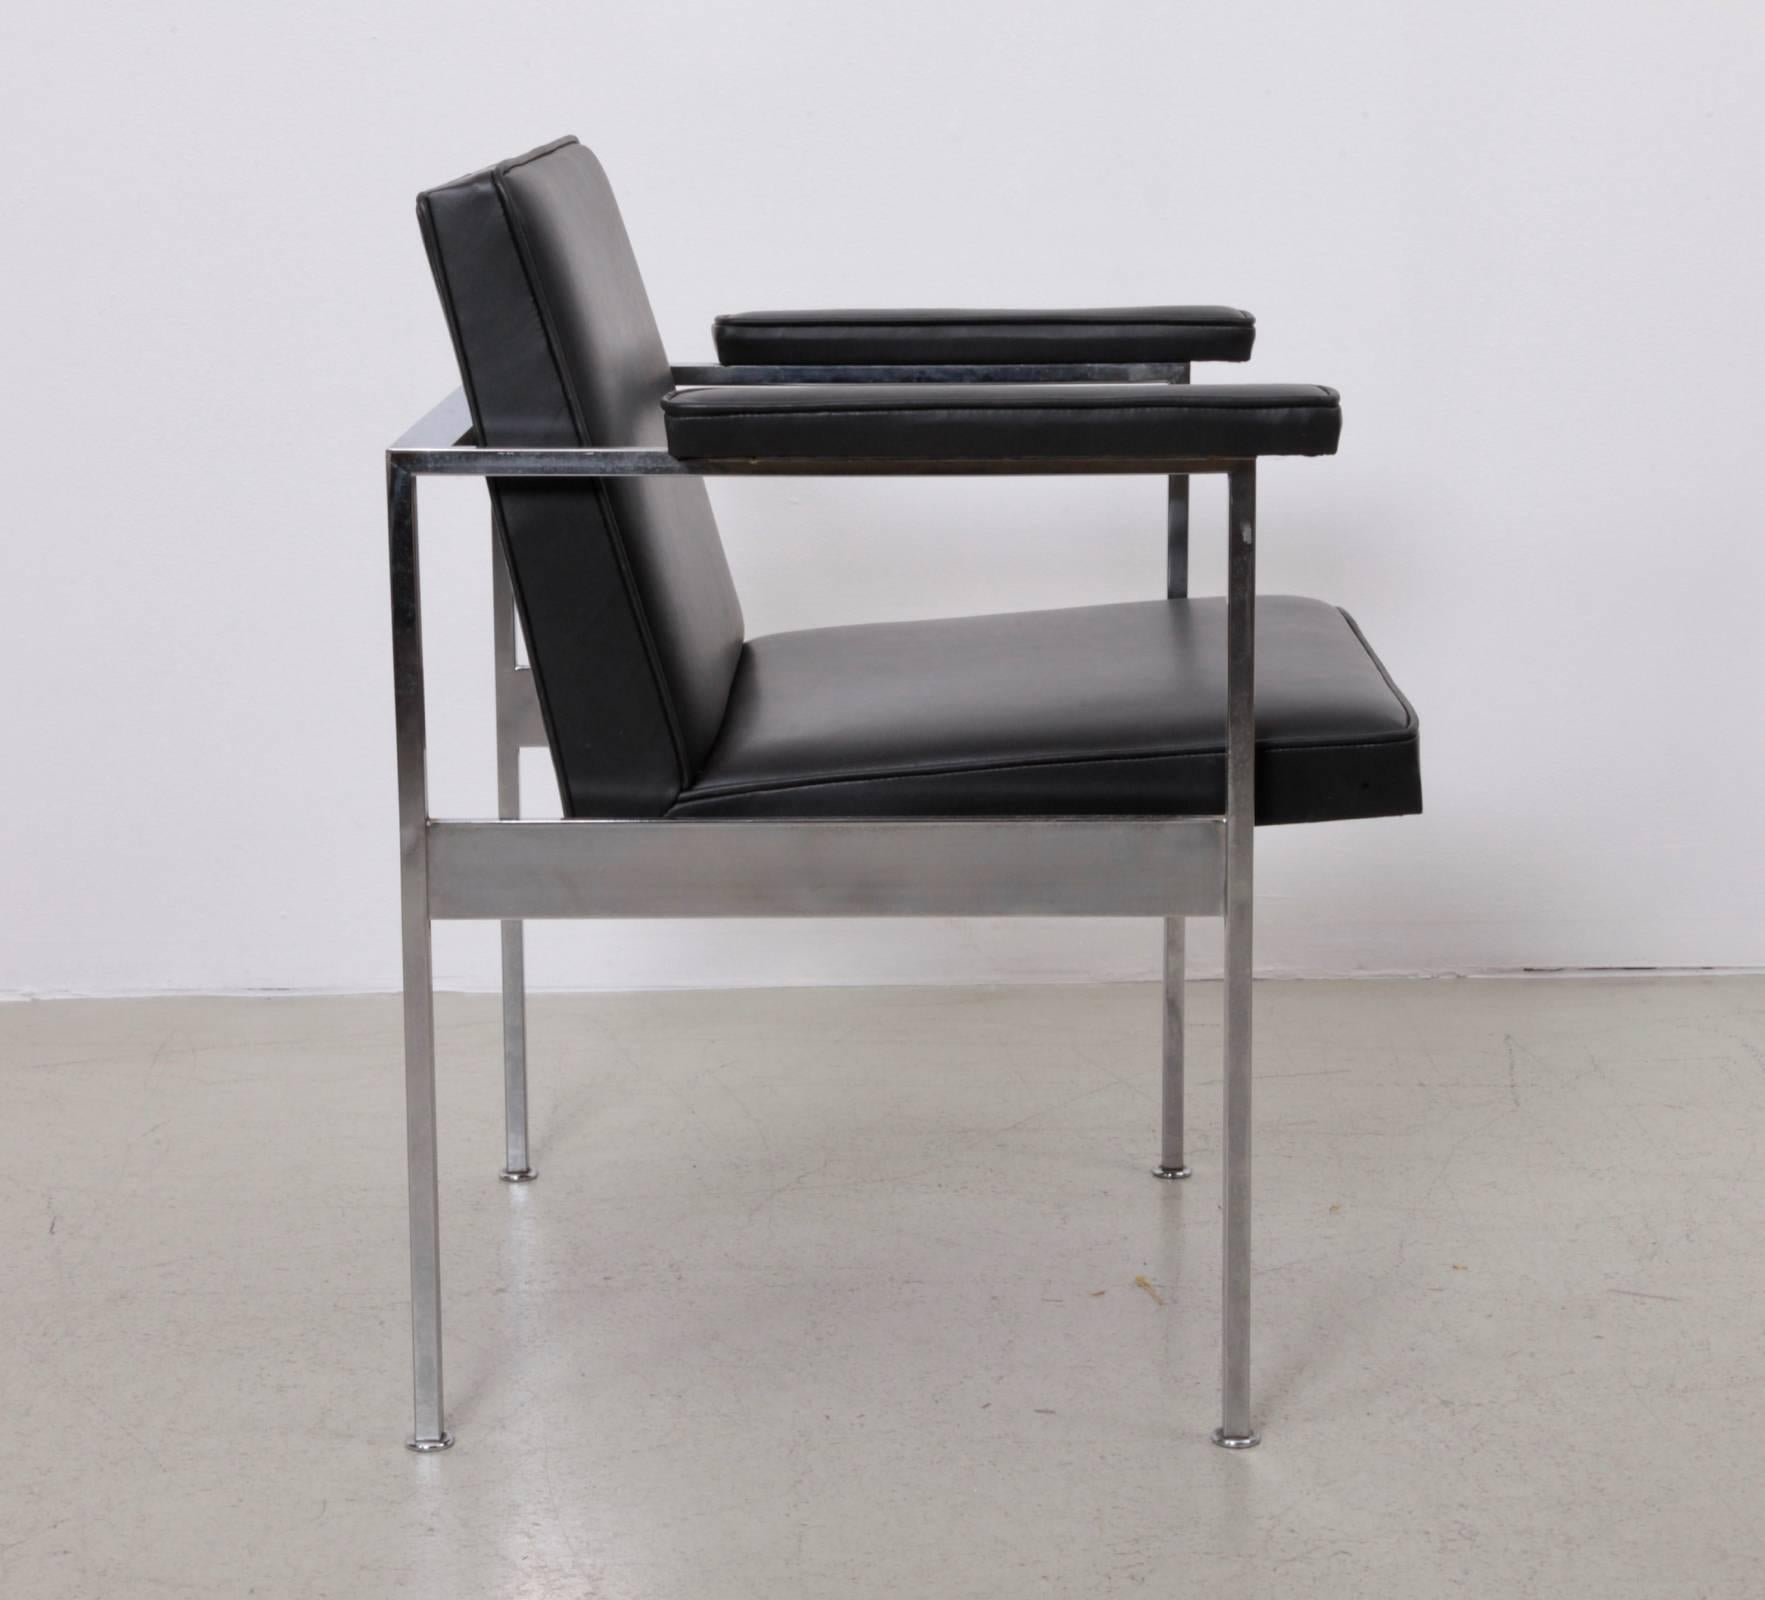 Set of four armchairs by George Nelson for Herman Miller in black aniline leather. Original Herman Miller circle tag present to underside as shown.

